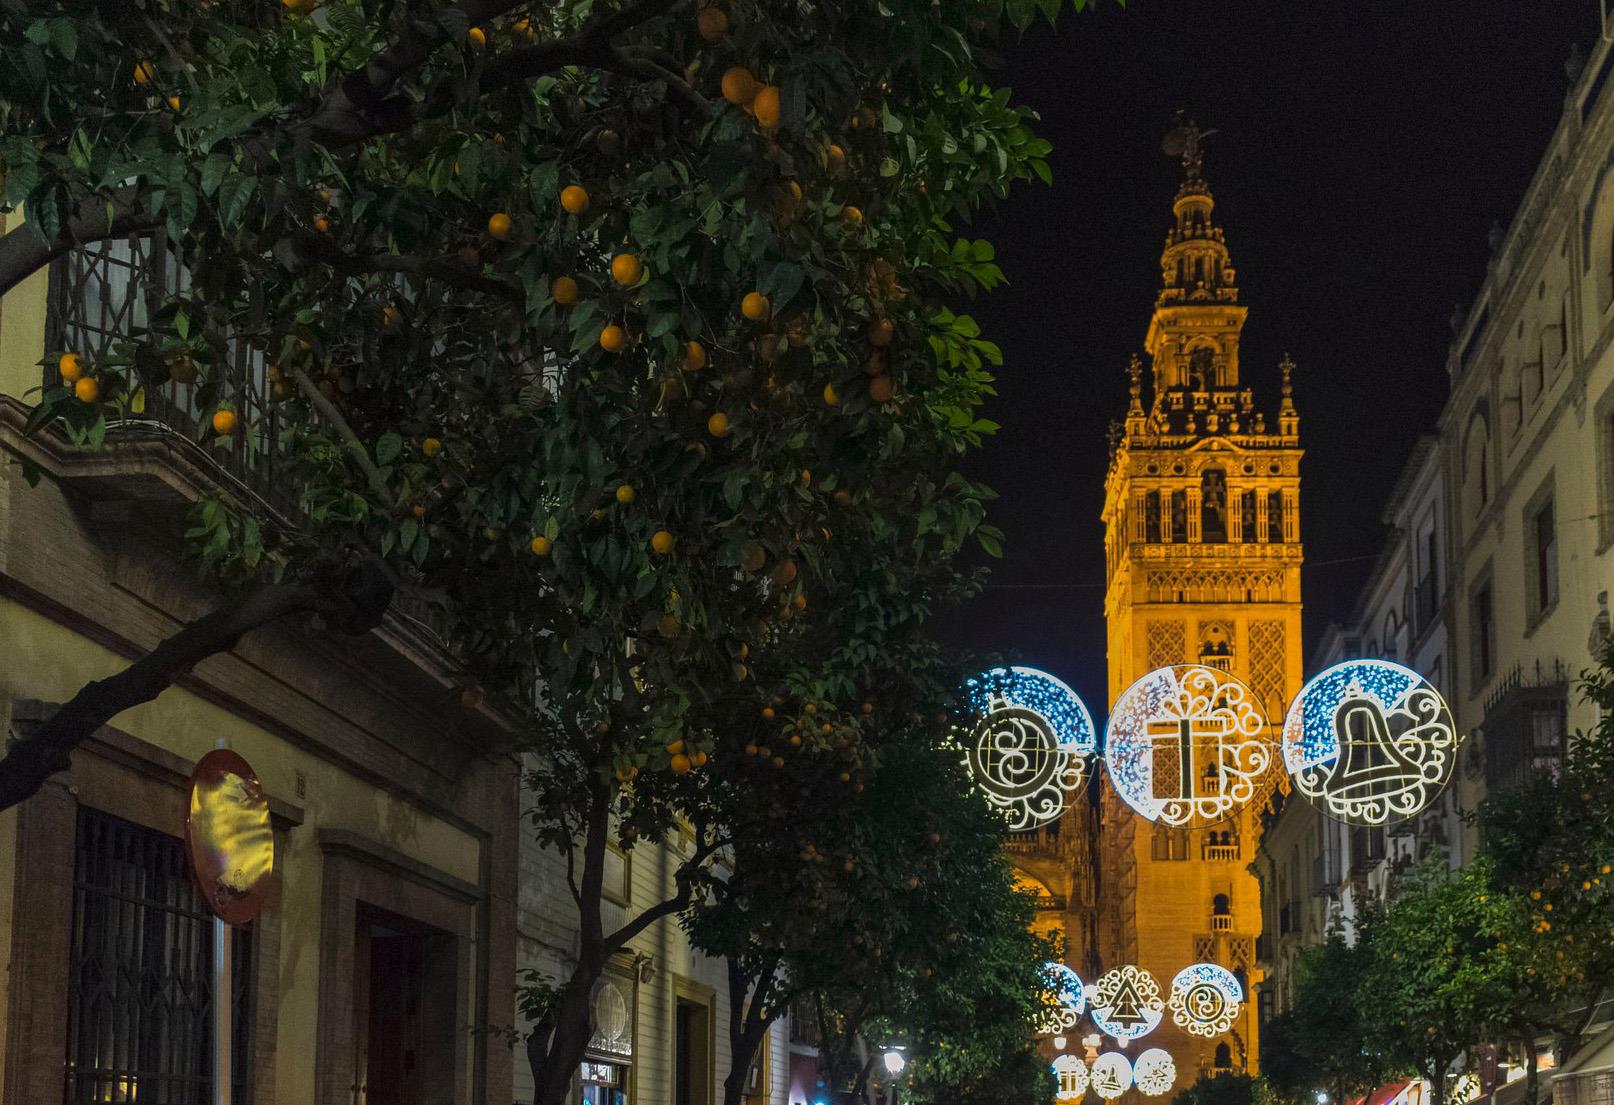 Tour of the Christmas lights in Seville